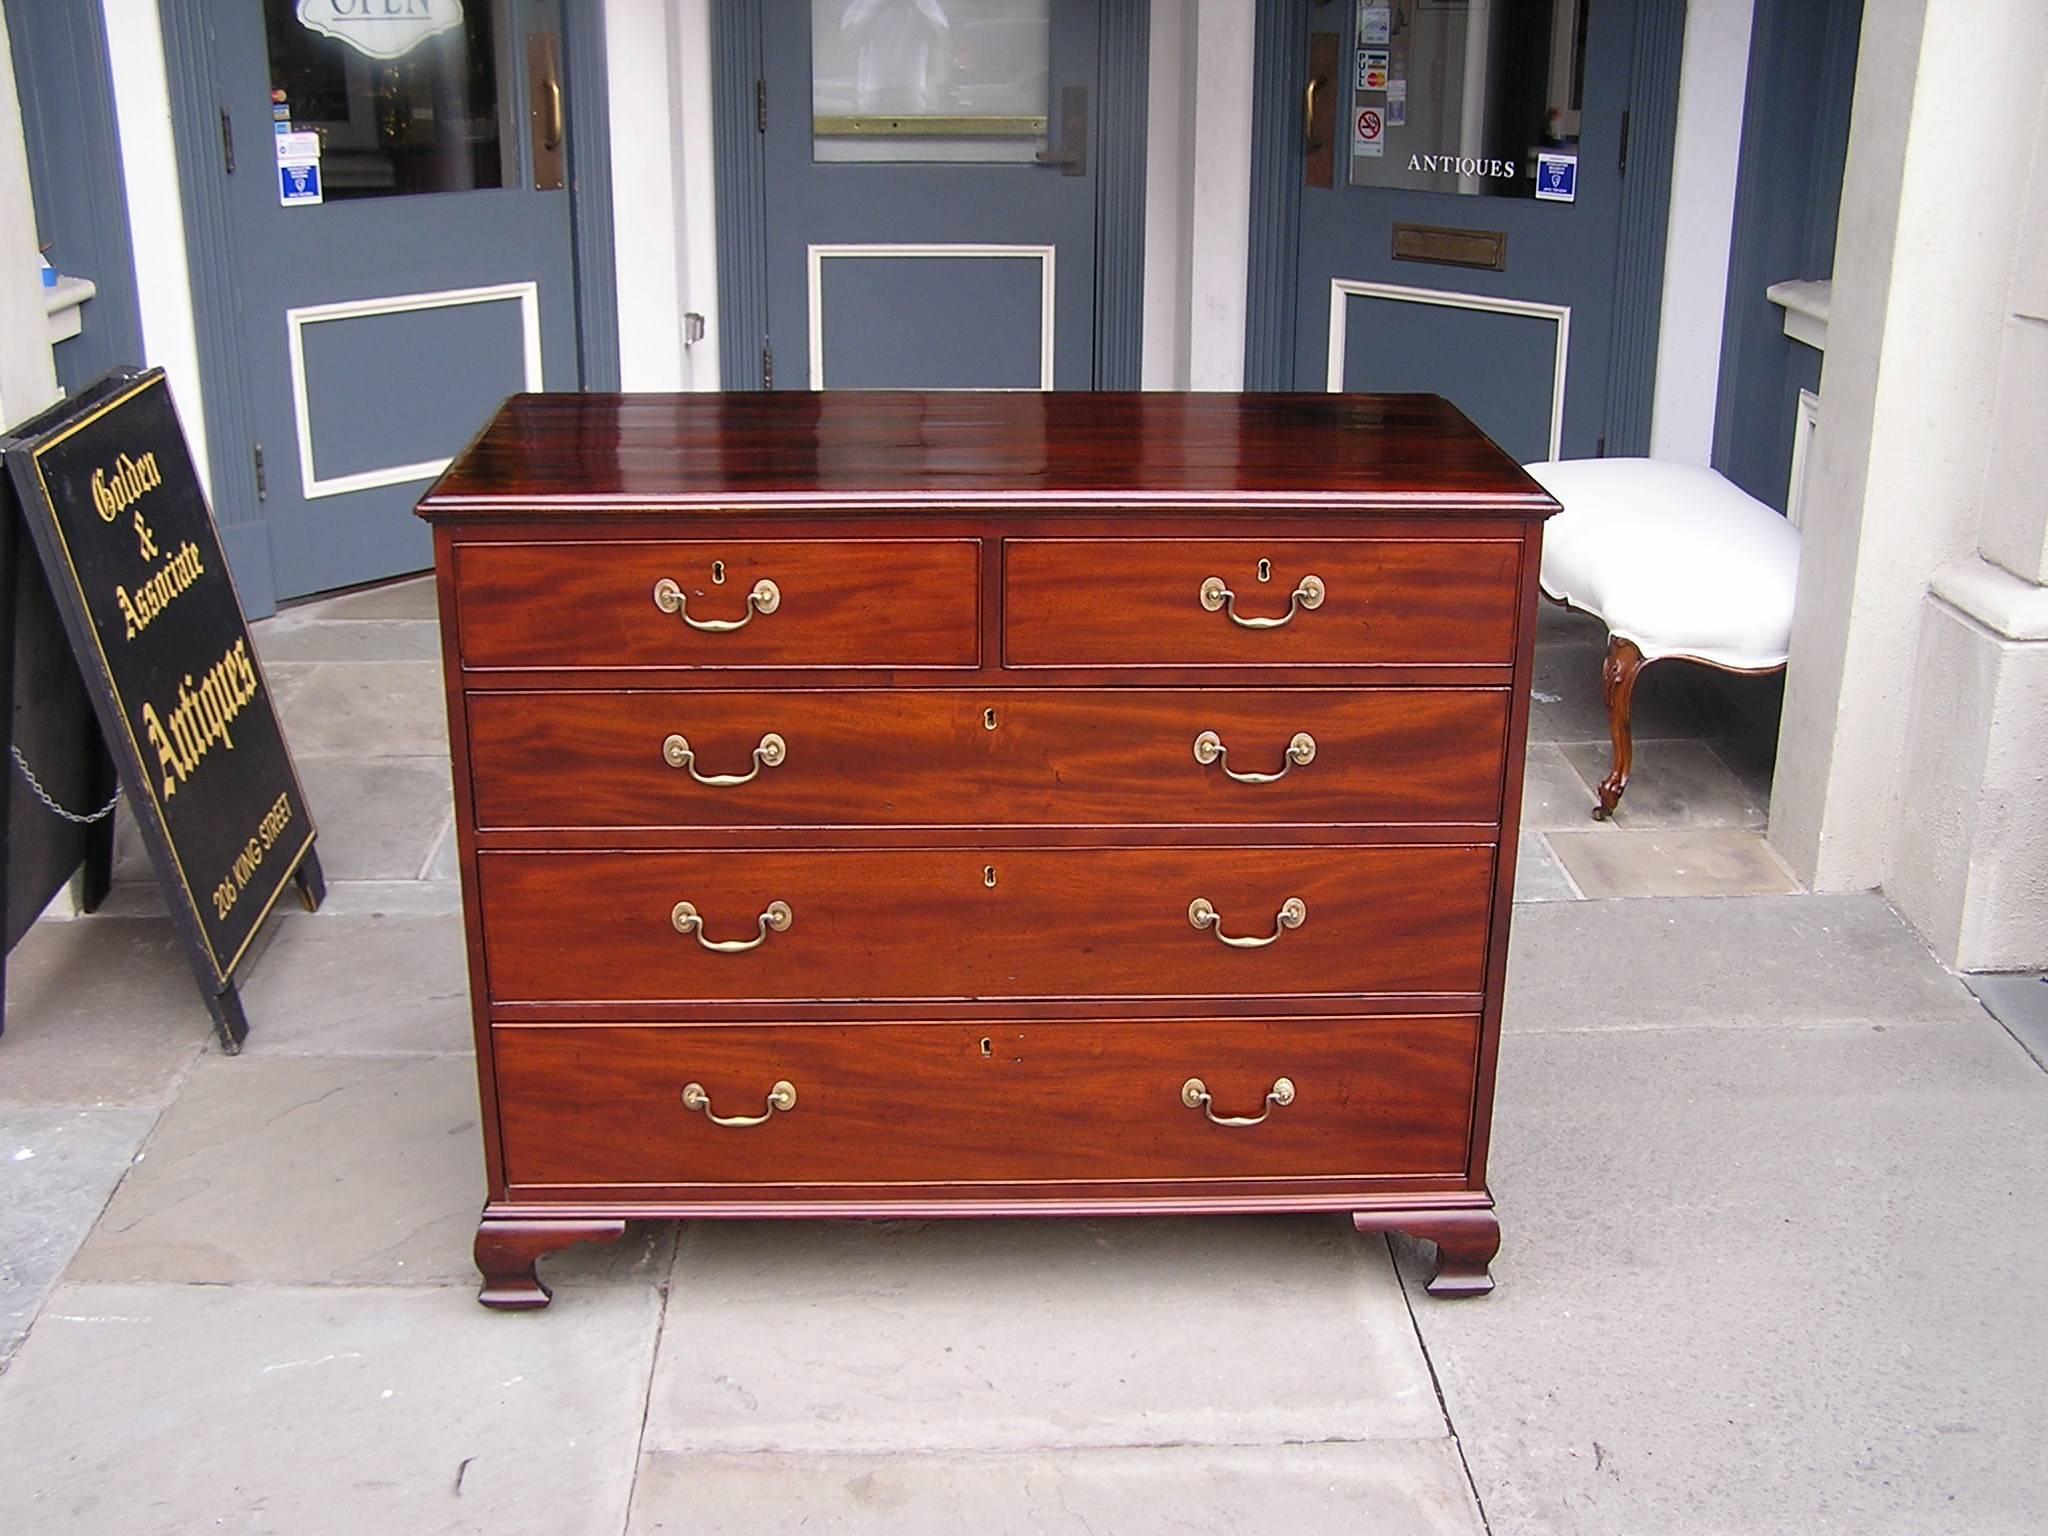 English Chippendale mahogany graduated five drawer chest with a carved upper molded edge, original brass pulls & escutcheons, terminating on the original bracket feet,  Late 18th Century.